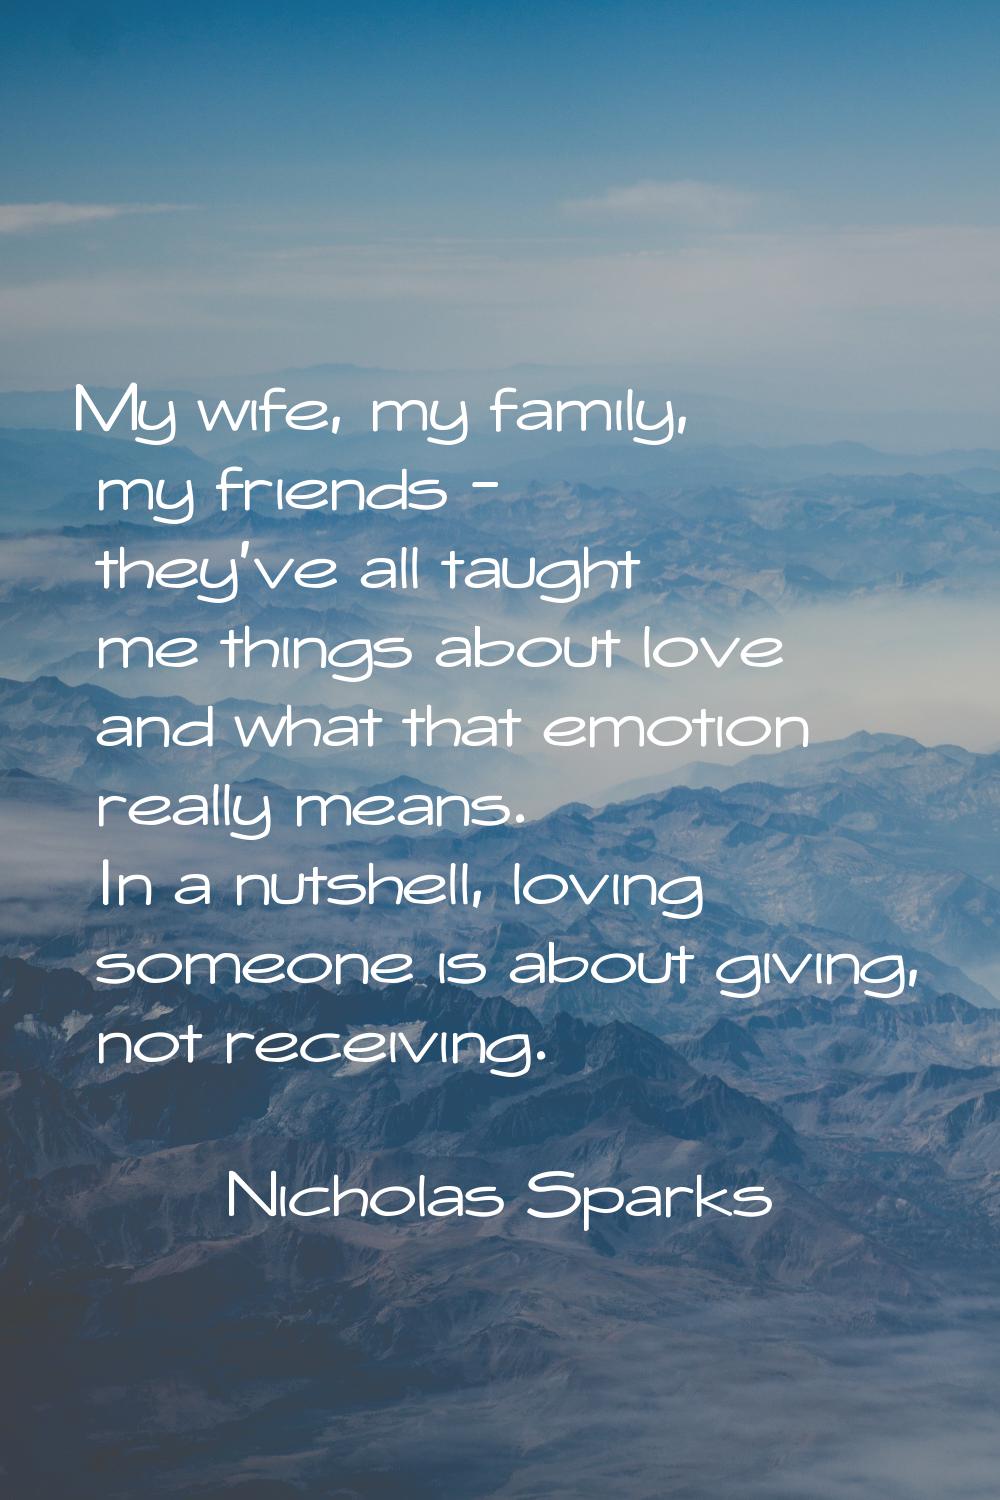 My wife, my family, my friends - they've all taught me things about love and what that emotion real